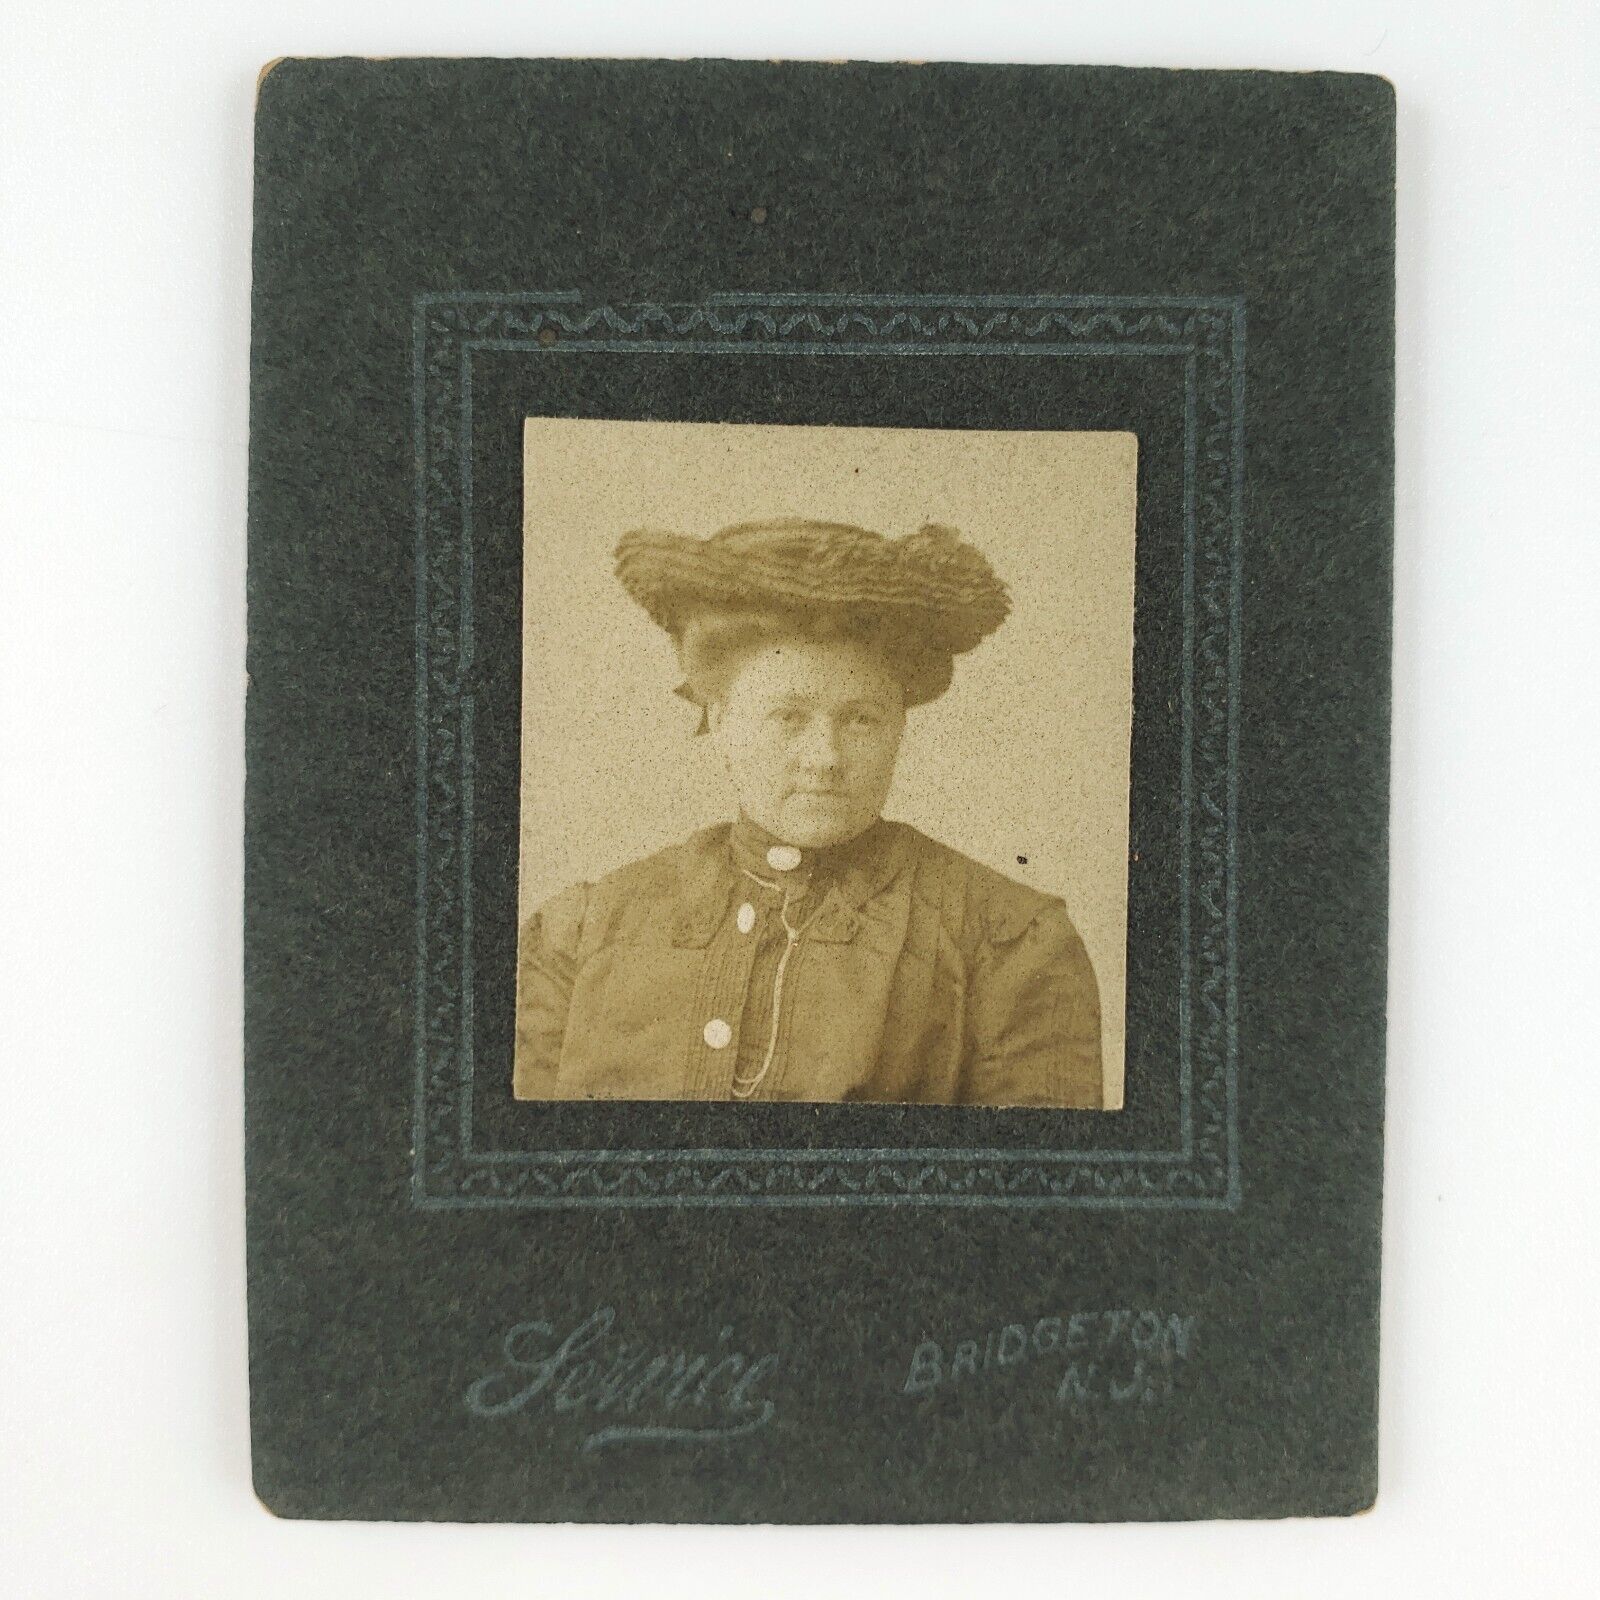 Named Bridgeton New Jersey Photo c1890 Victorian Hat Woman Penny Card Lady A2812